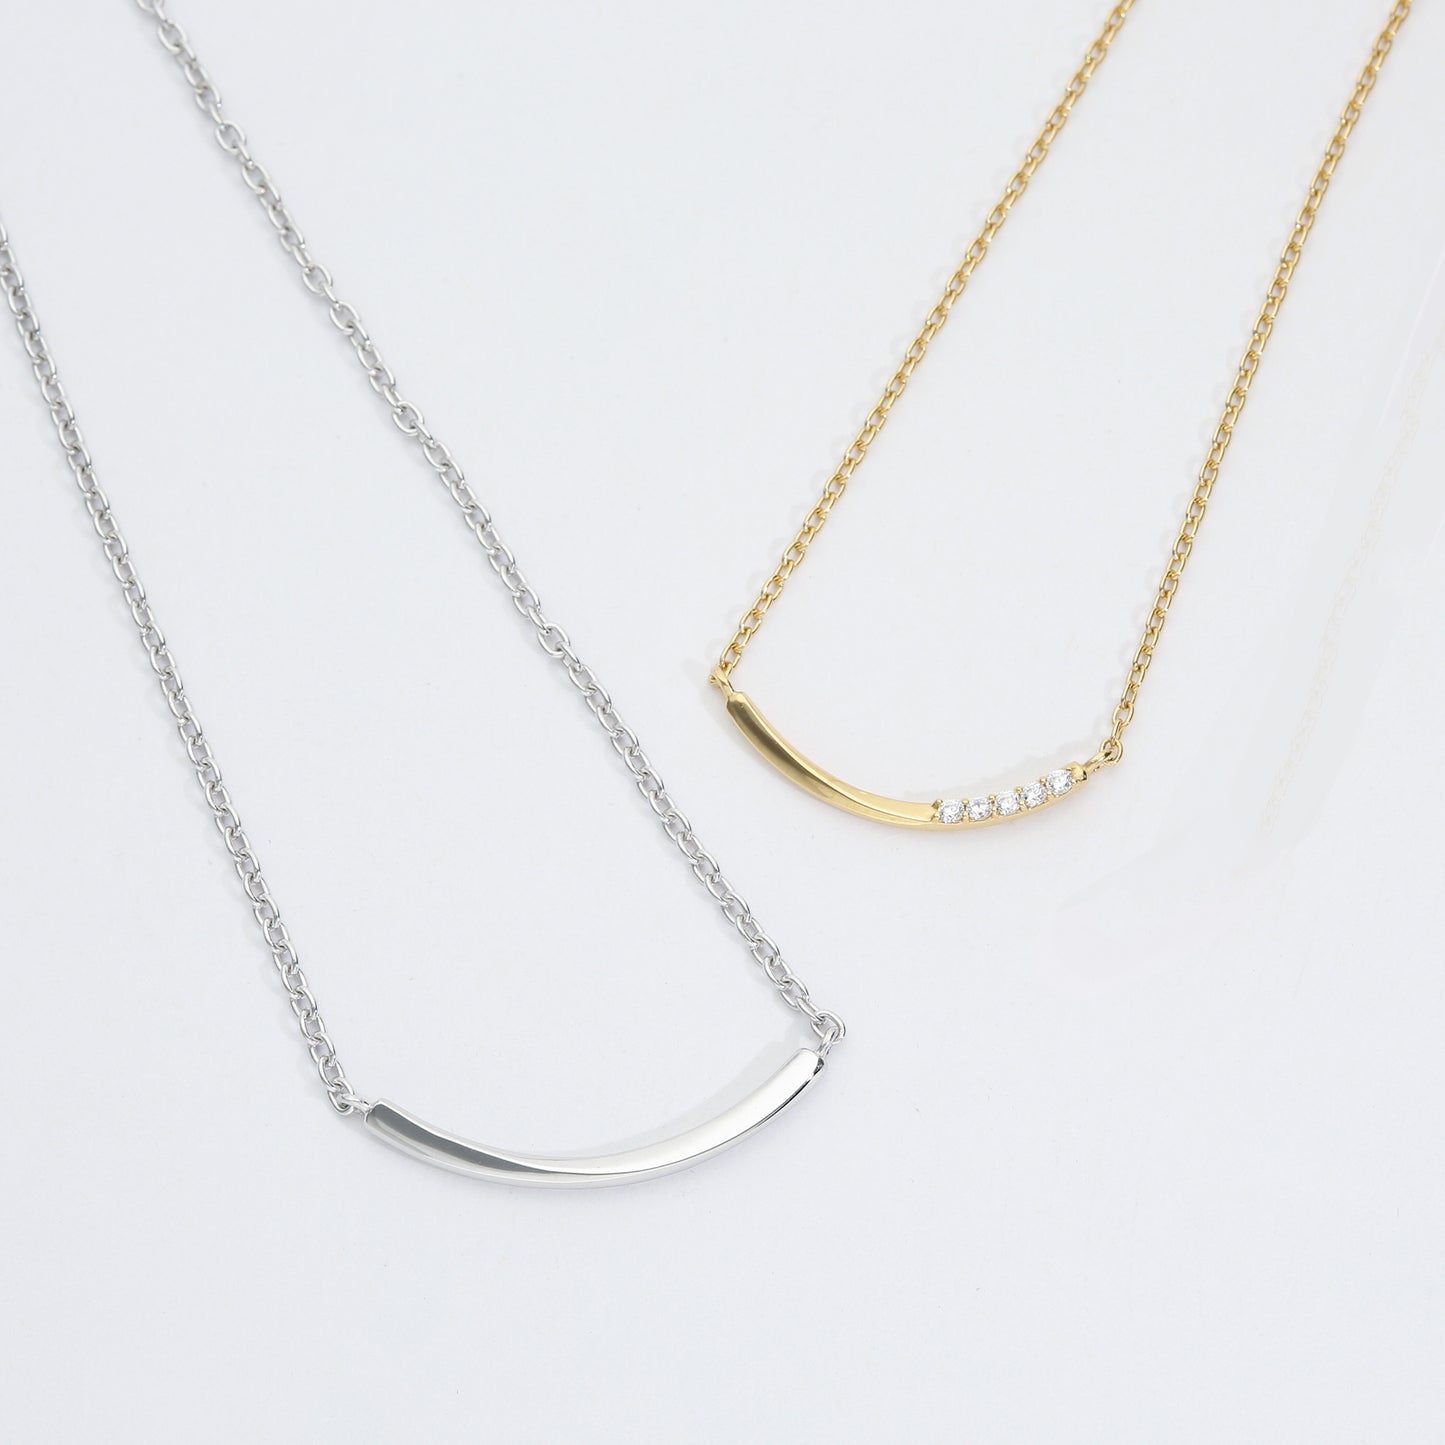 Pair Necklace | 64-3712-3713